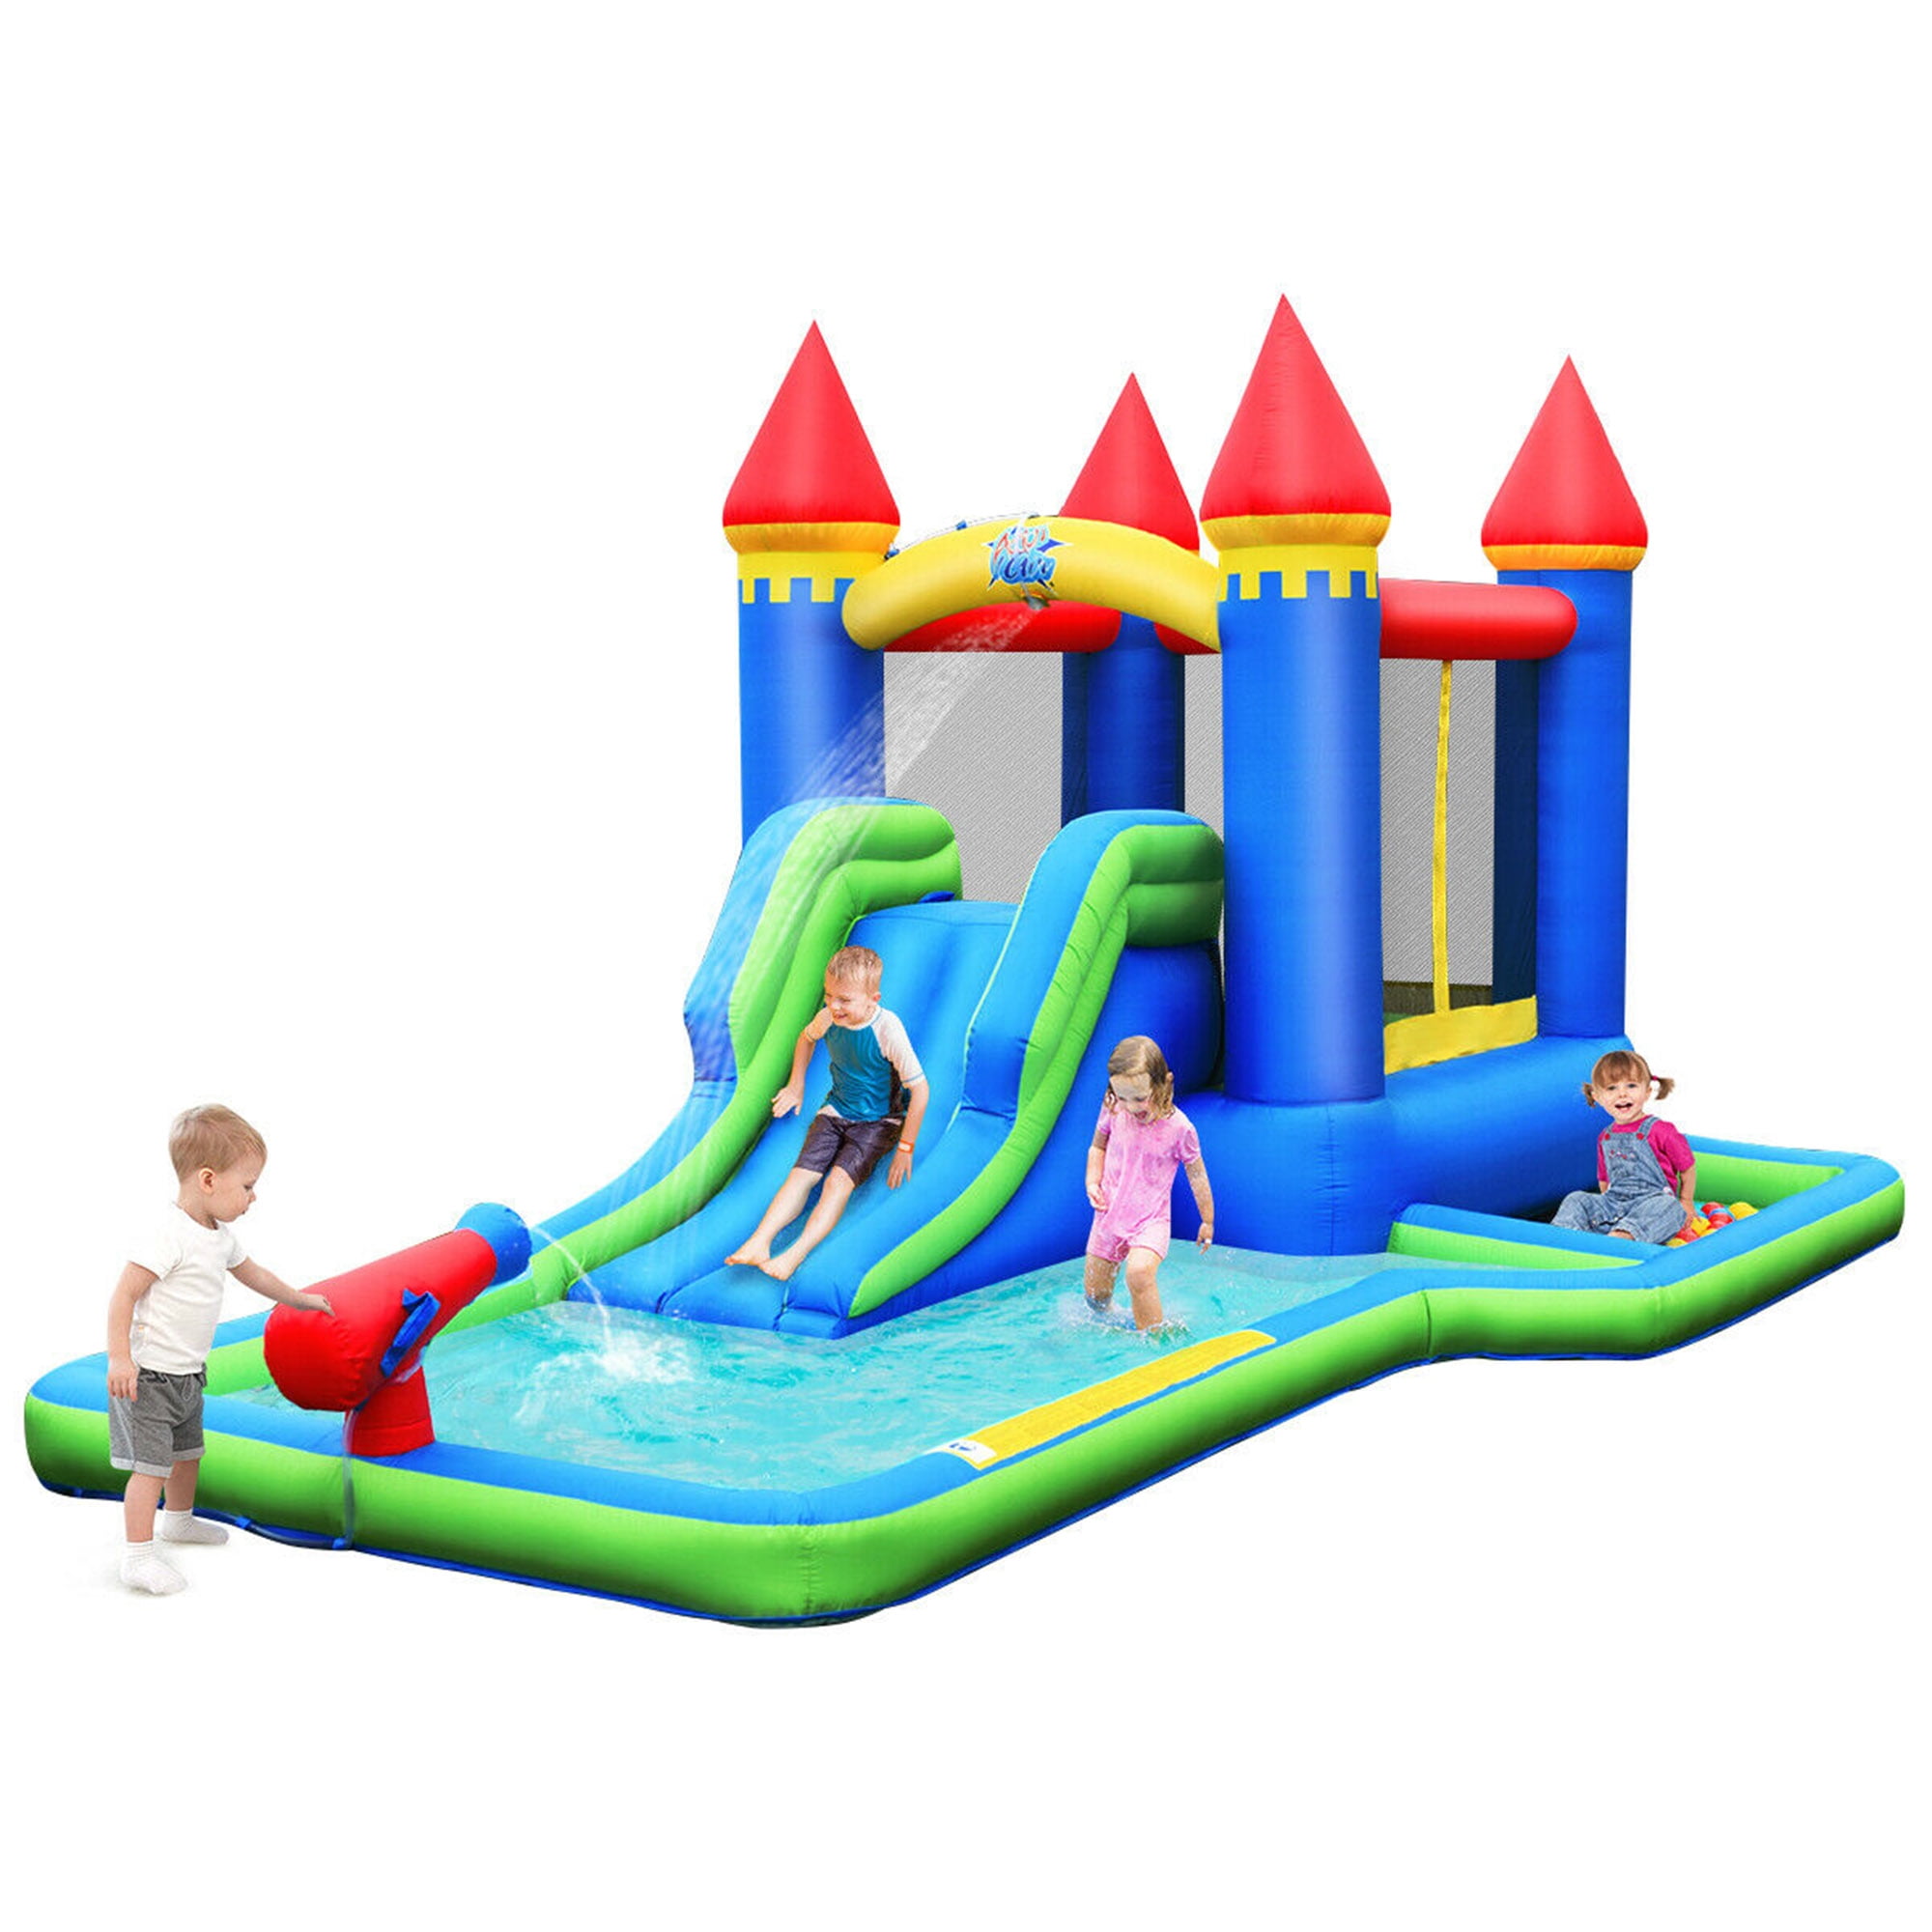 Details about   Kids Playing Inflatable Bounce House Jumper Castle Game Fun Slide without Blower 